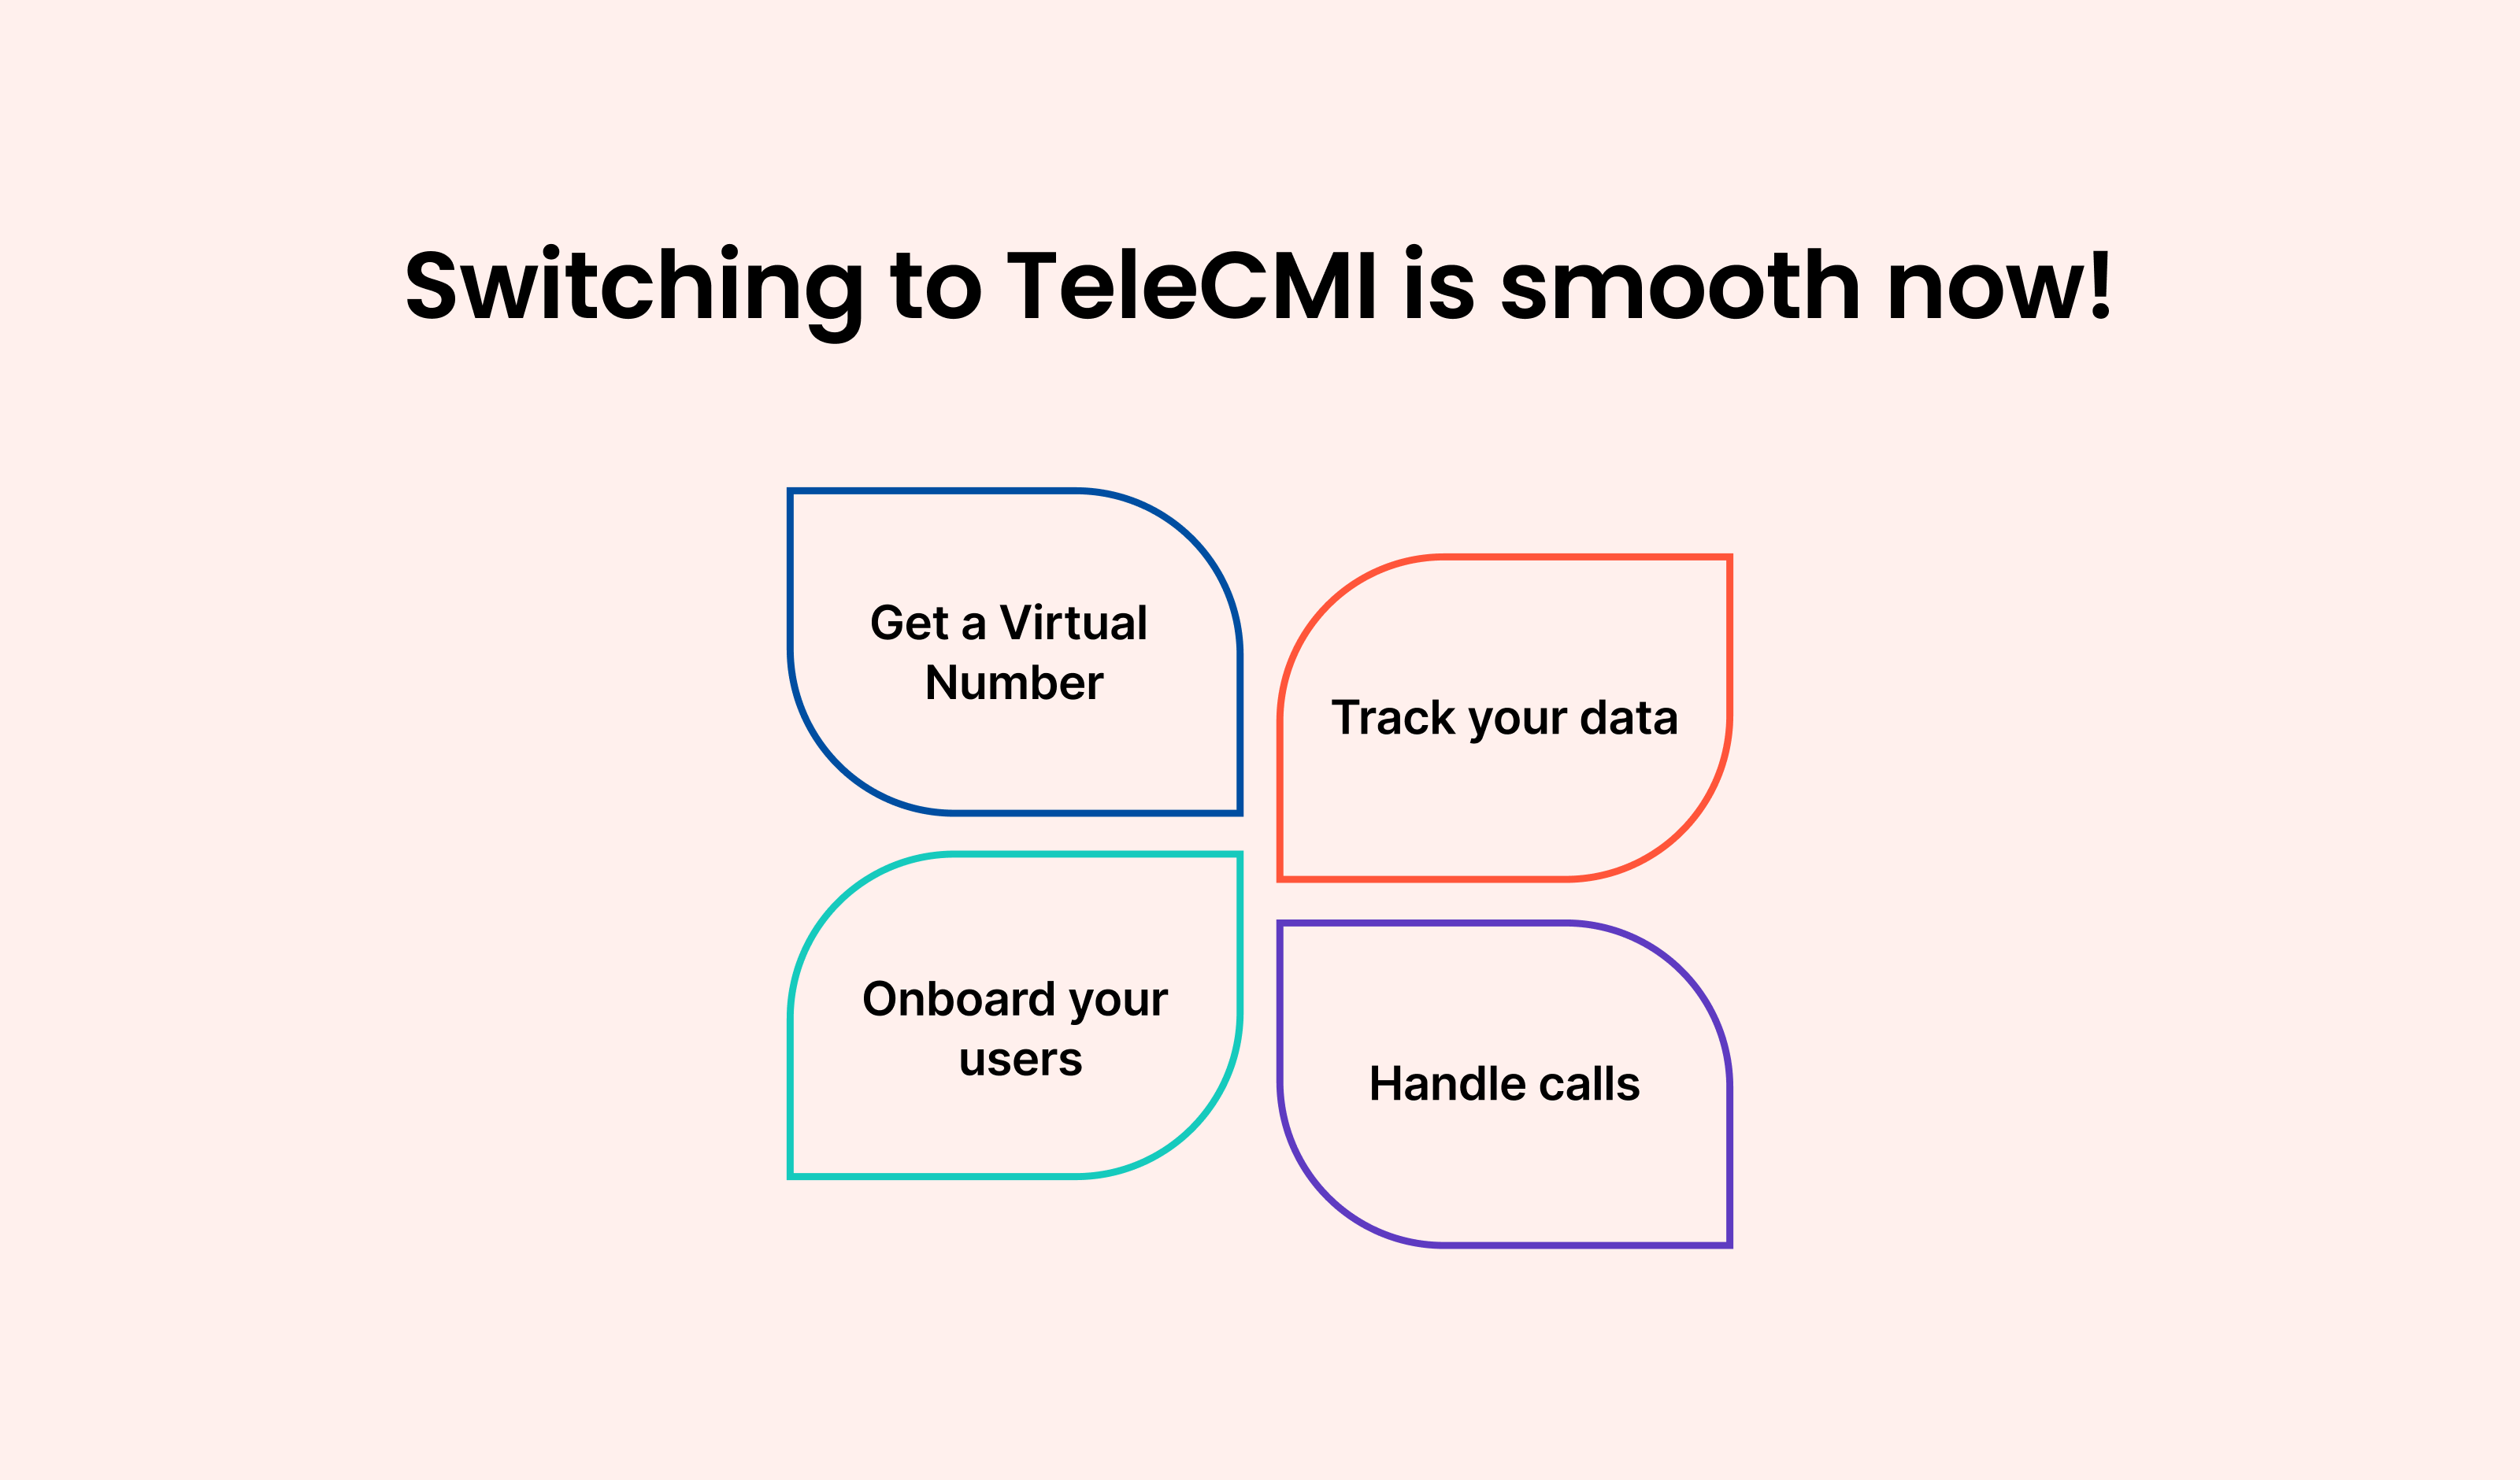 Switching to TeleCMI is smooth now!